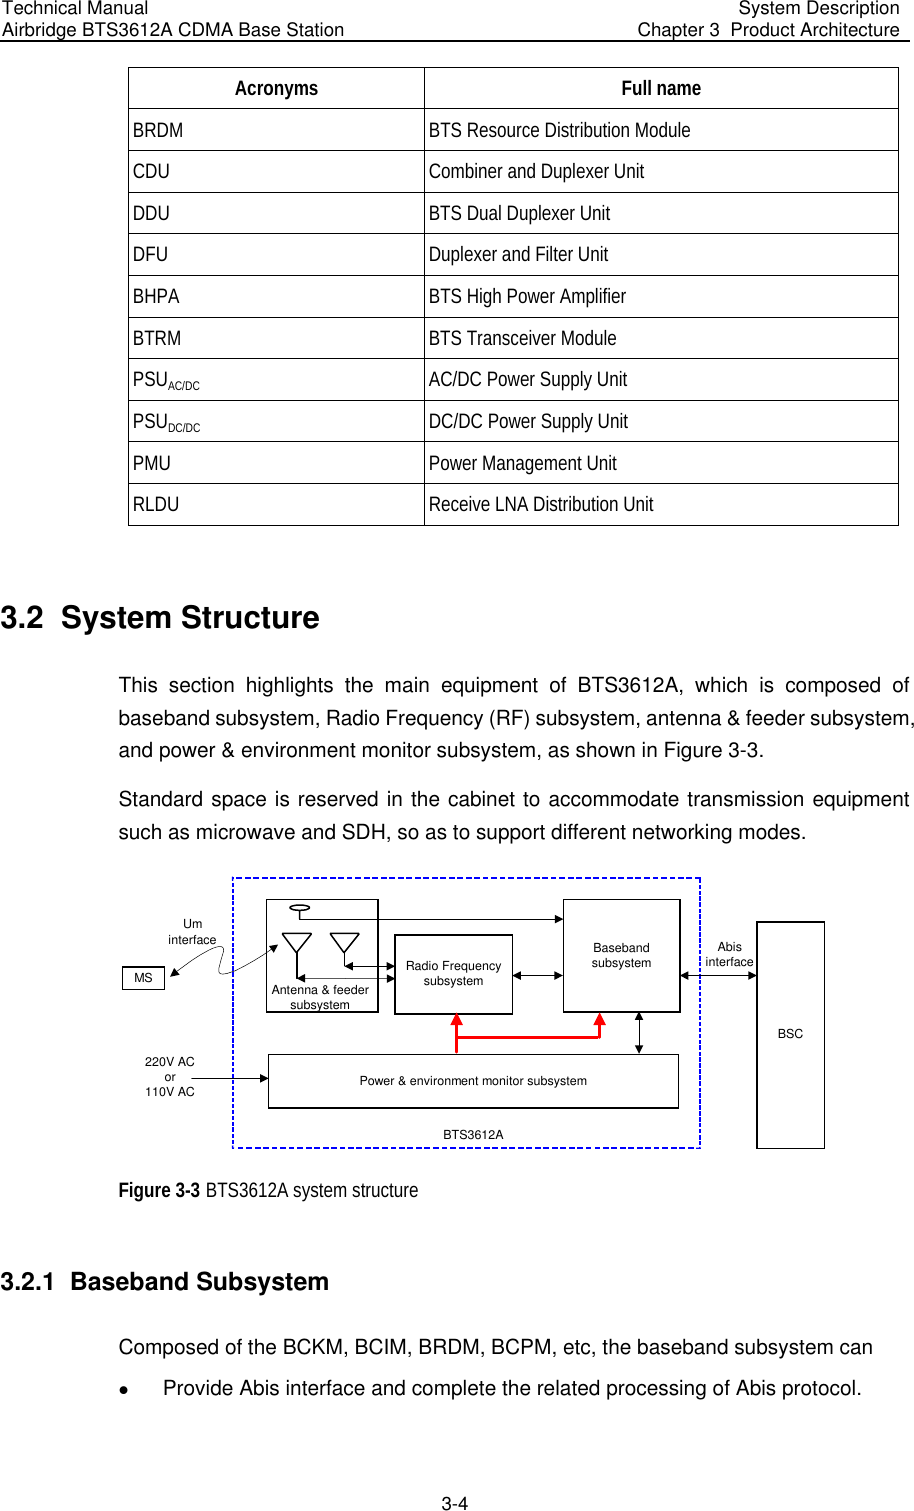 Technical Manual Airbridge BTS3612A CDMA Base Station System Description Chapter 3  Product Architecture  3-4 Acronyms Full name BRDM BTS Resource Distribution Module CDU  Combiner and Duplexer Unit DDU  BTS Dual Duplexer Unit DFU Duplexer and Filter Unit BHPA  BTS High Power Amplifier BTRM  BTS Transceiver Module PSUAC/DC AC/DC Power Supply Unit PSUDC/DC DC/DC Power Supply Unit PMU  Power Management Unit RLDU  Receive LNA Distribution Unit  3.2  System Structure This section highlights the main equipment of BTS3612A, which is composed of baseband subsystem, Radio Frequency (RF) subsystem, antenna &amp; feeder subsystem, and power &amp; environment monitor subsystem, as shown in Figure 3-3. Standard space is reserved in the cabinet to accommodate transmission equipment such as microwave and SDH, so as to support different networking modes.  BSCBasebandsubsystemPower &amp; environment monitor subsystemRadio FrequencysubsystemAbisinterfaceUminterfaceMS Antenna &amp; feedersubsystem220V ACor110V ACBTS3612A  Figure 3-3 BTS3612A system structure  3.2.1  Baseband Subsystem Composed of the BCKM, BCIM, BRDM, BCPM, etc, the baseband subsystem can  z Provide Abis interface and complete the related processing of Abis protocol.  